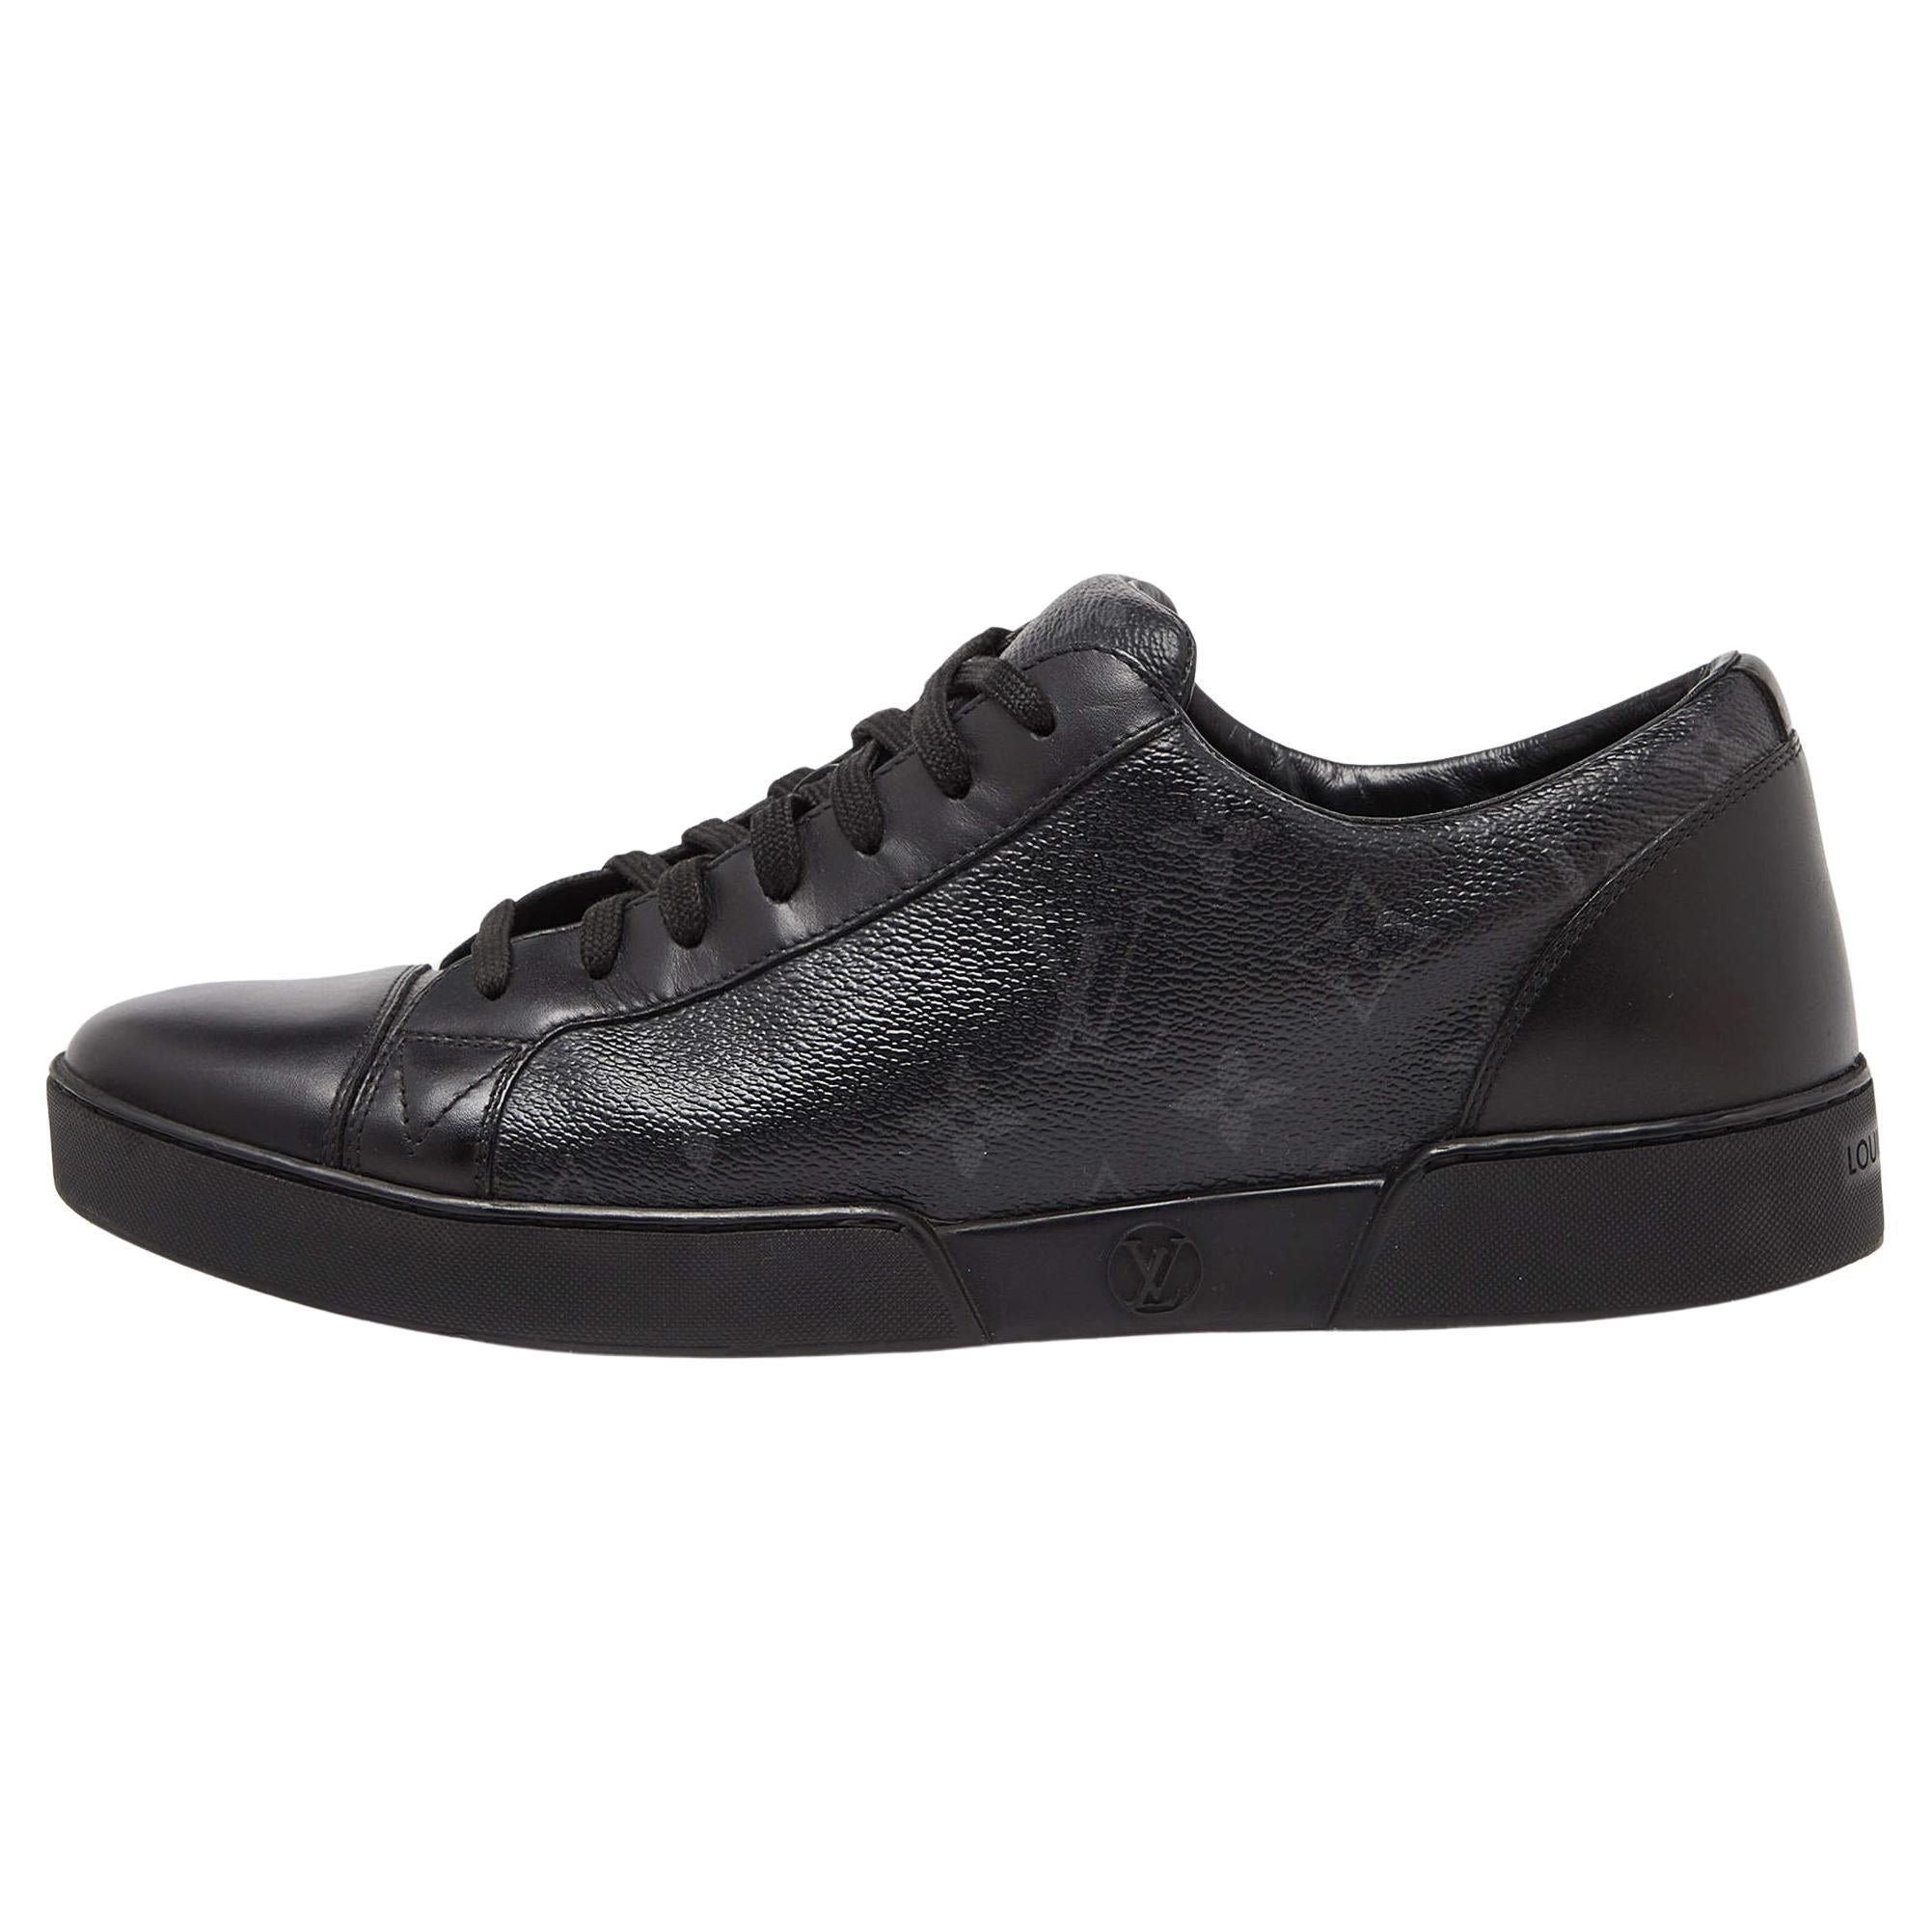 Louis Vuitton Black Leather and Monogram Coated Canvas Match Up Sneakers Size 42